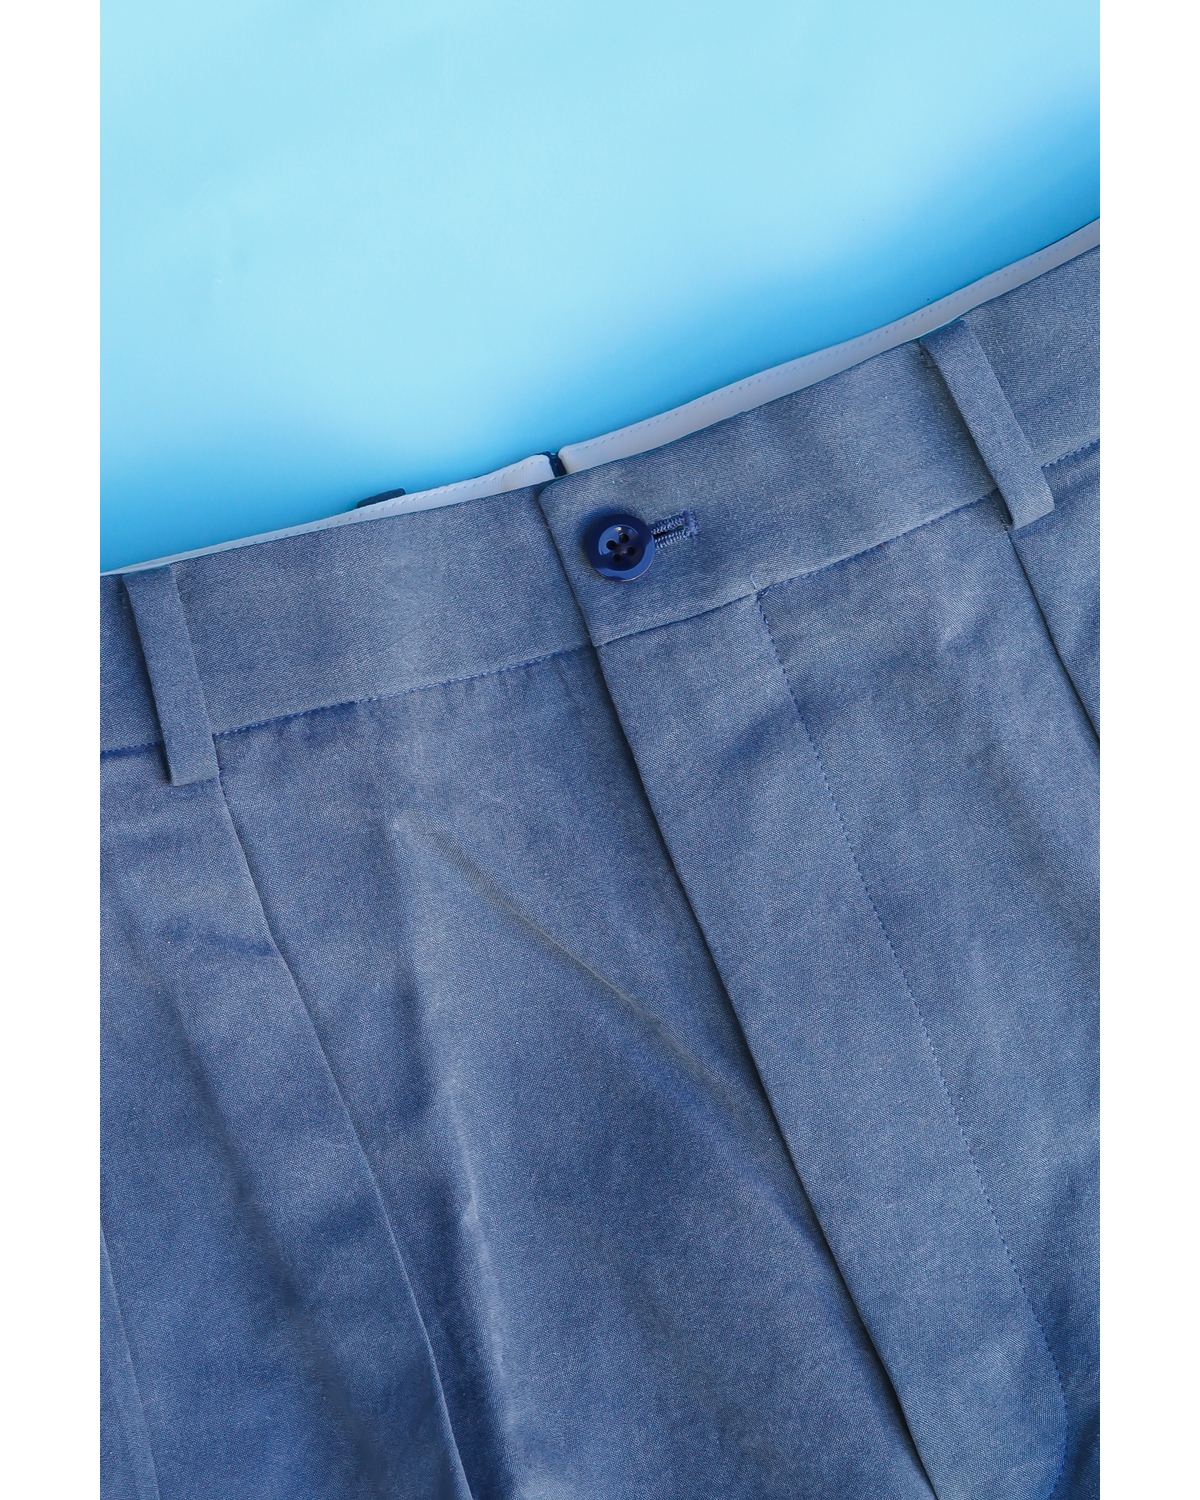 NEAT｜NEAT Chino | CELLULOSE NIDOM - Blue Gray <EXCLUSIVE